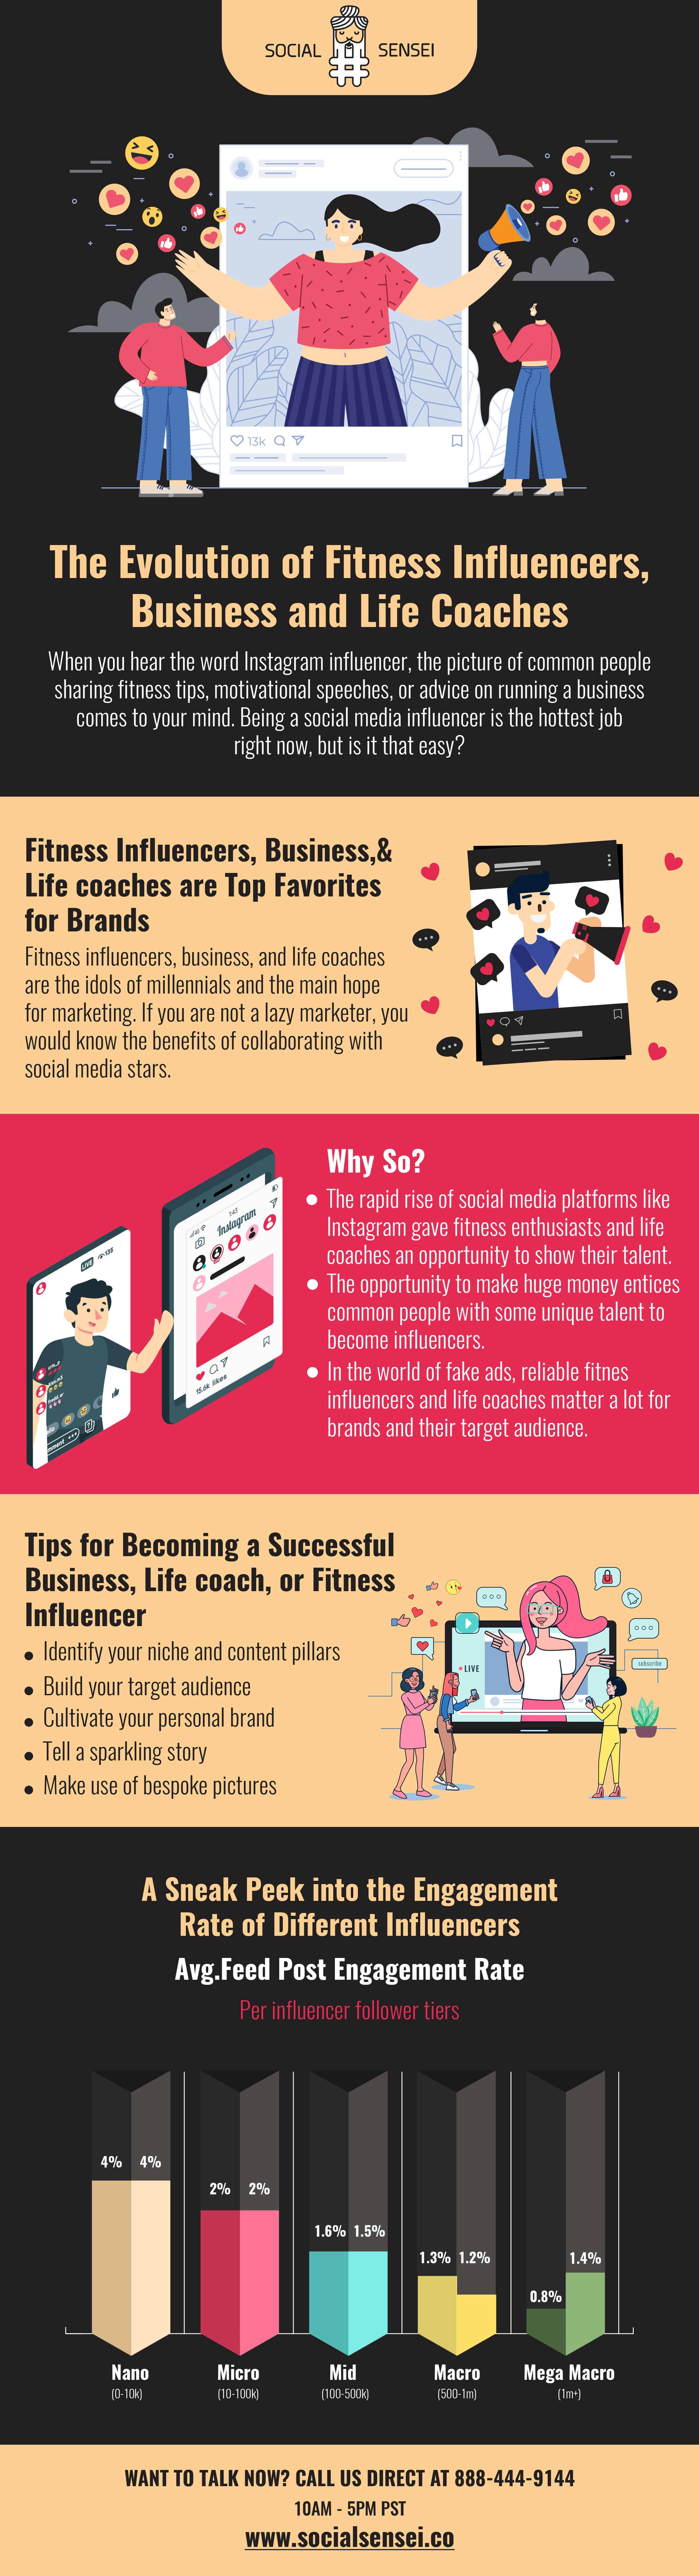 The Evolution of Instagram Fitness Influencers & How to Become A Fitness pro